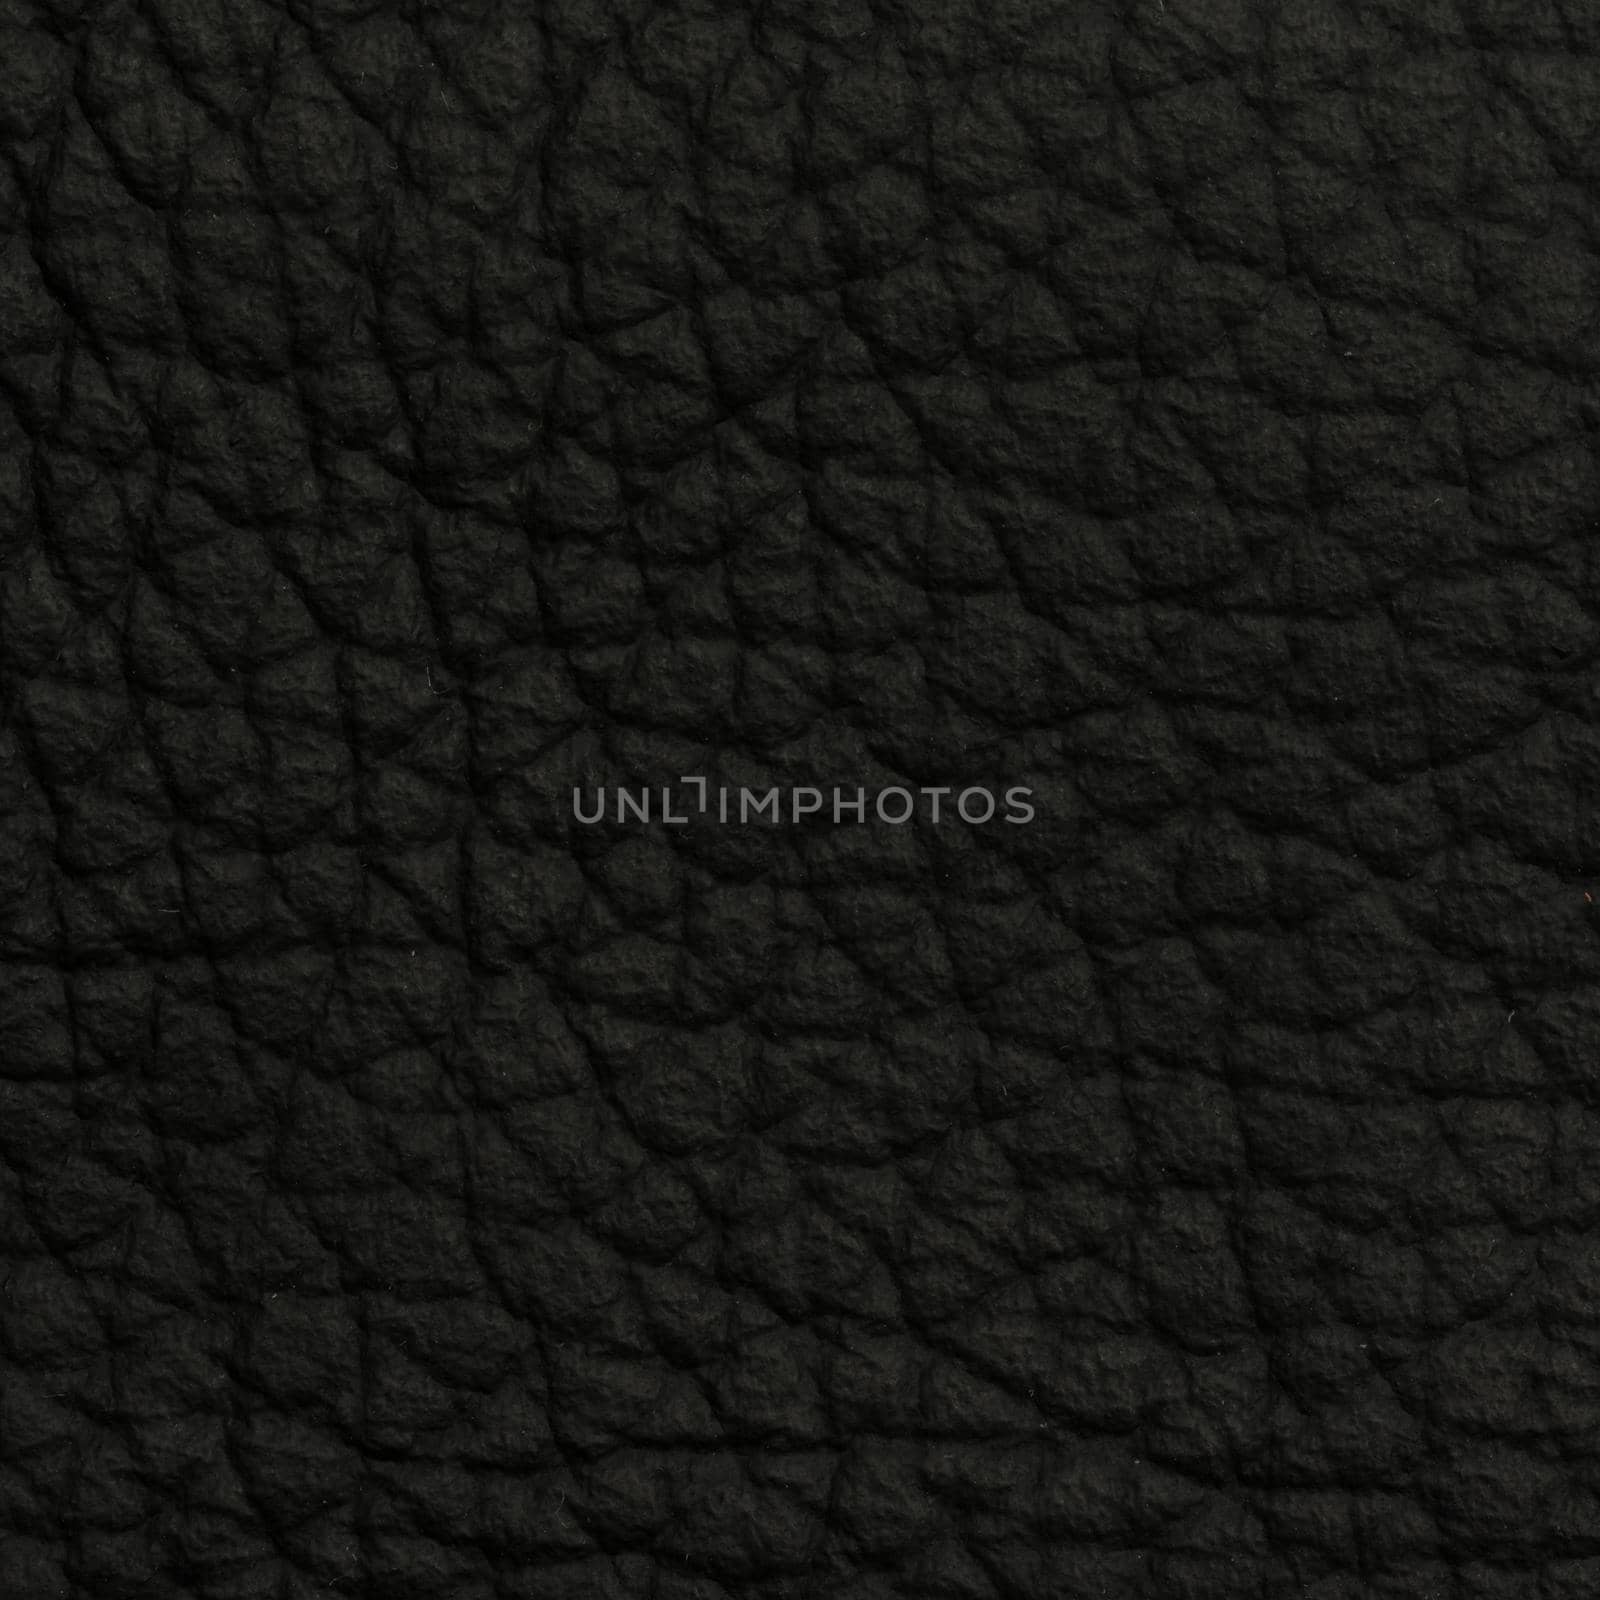 Black Leather texture closeup macro shot for background